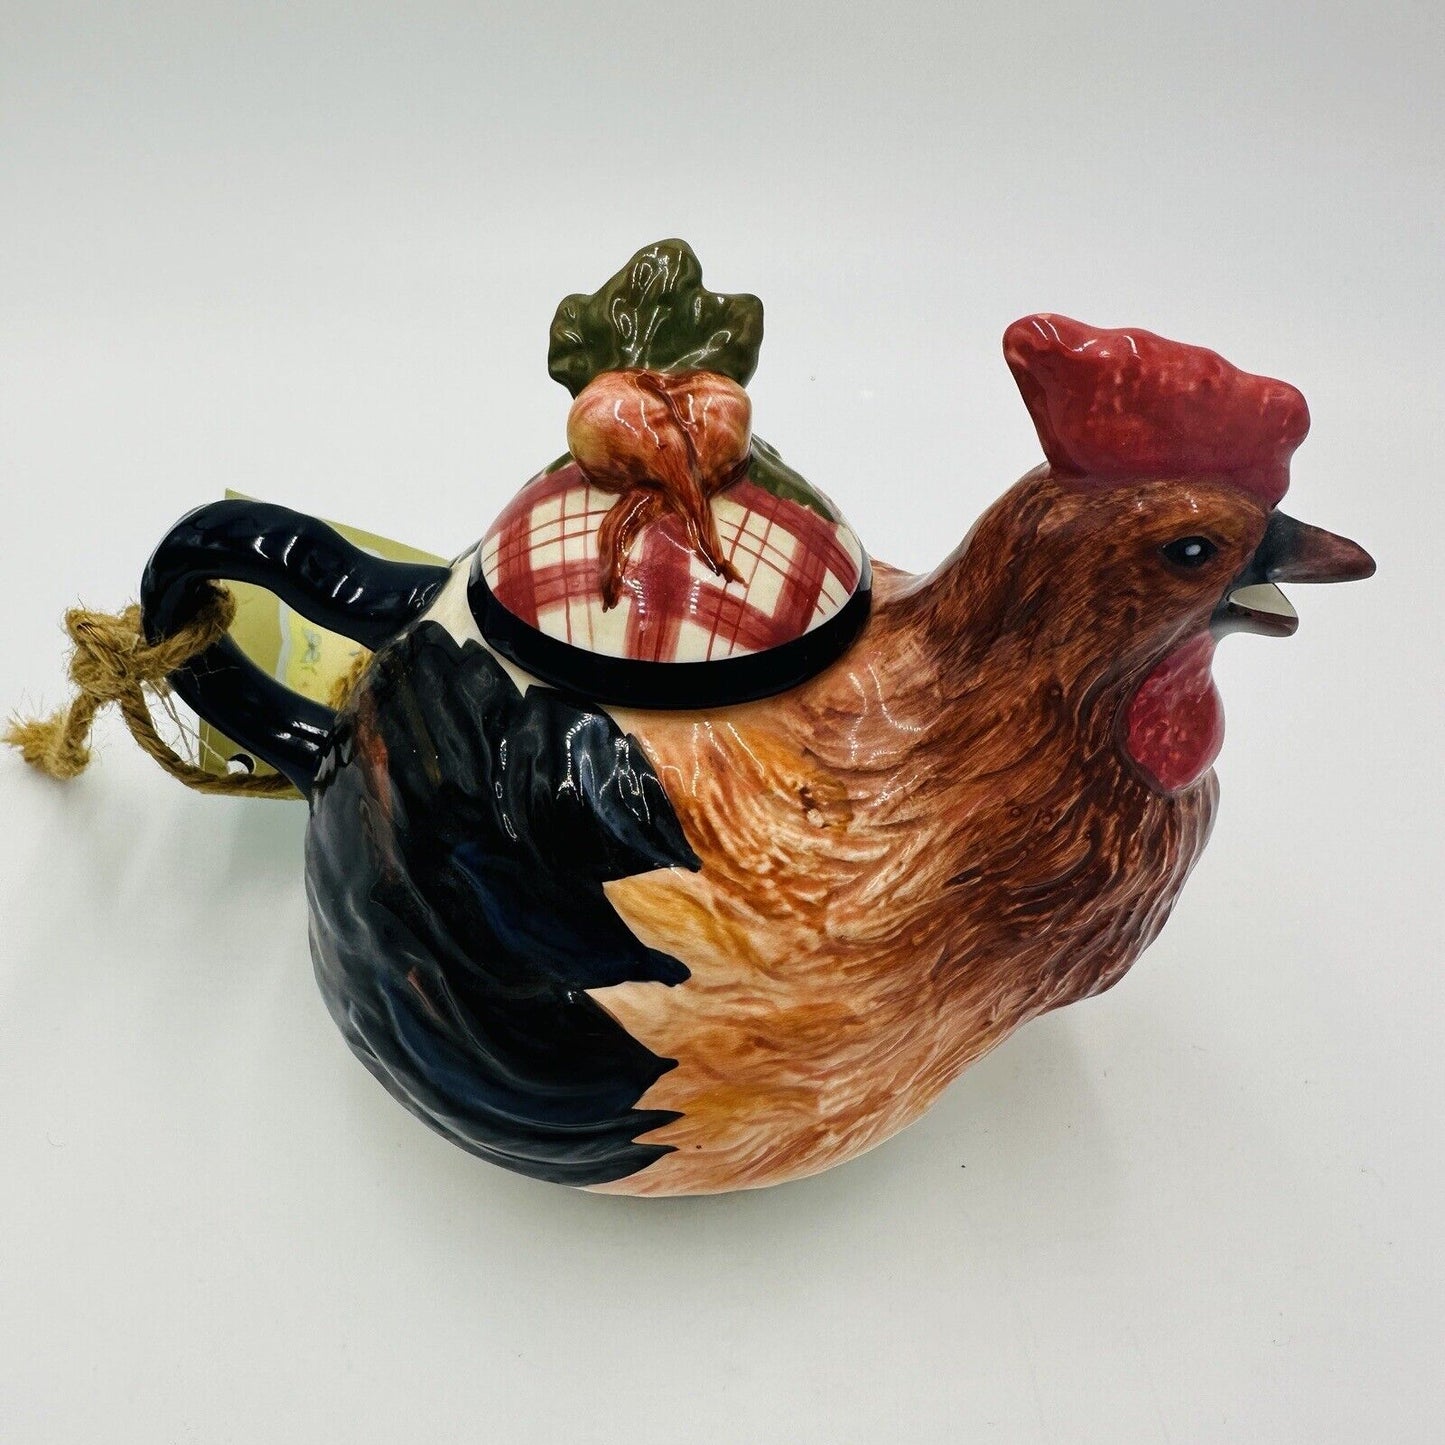 Tracy Porter Stoneware Rooster & Carrots Tea Pot 5.5” stonehouse farm collection